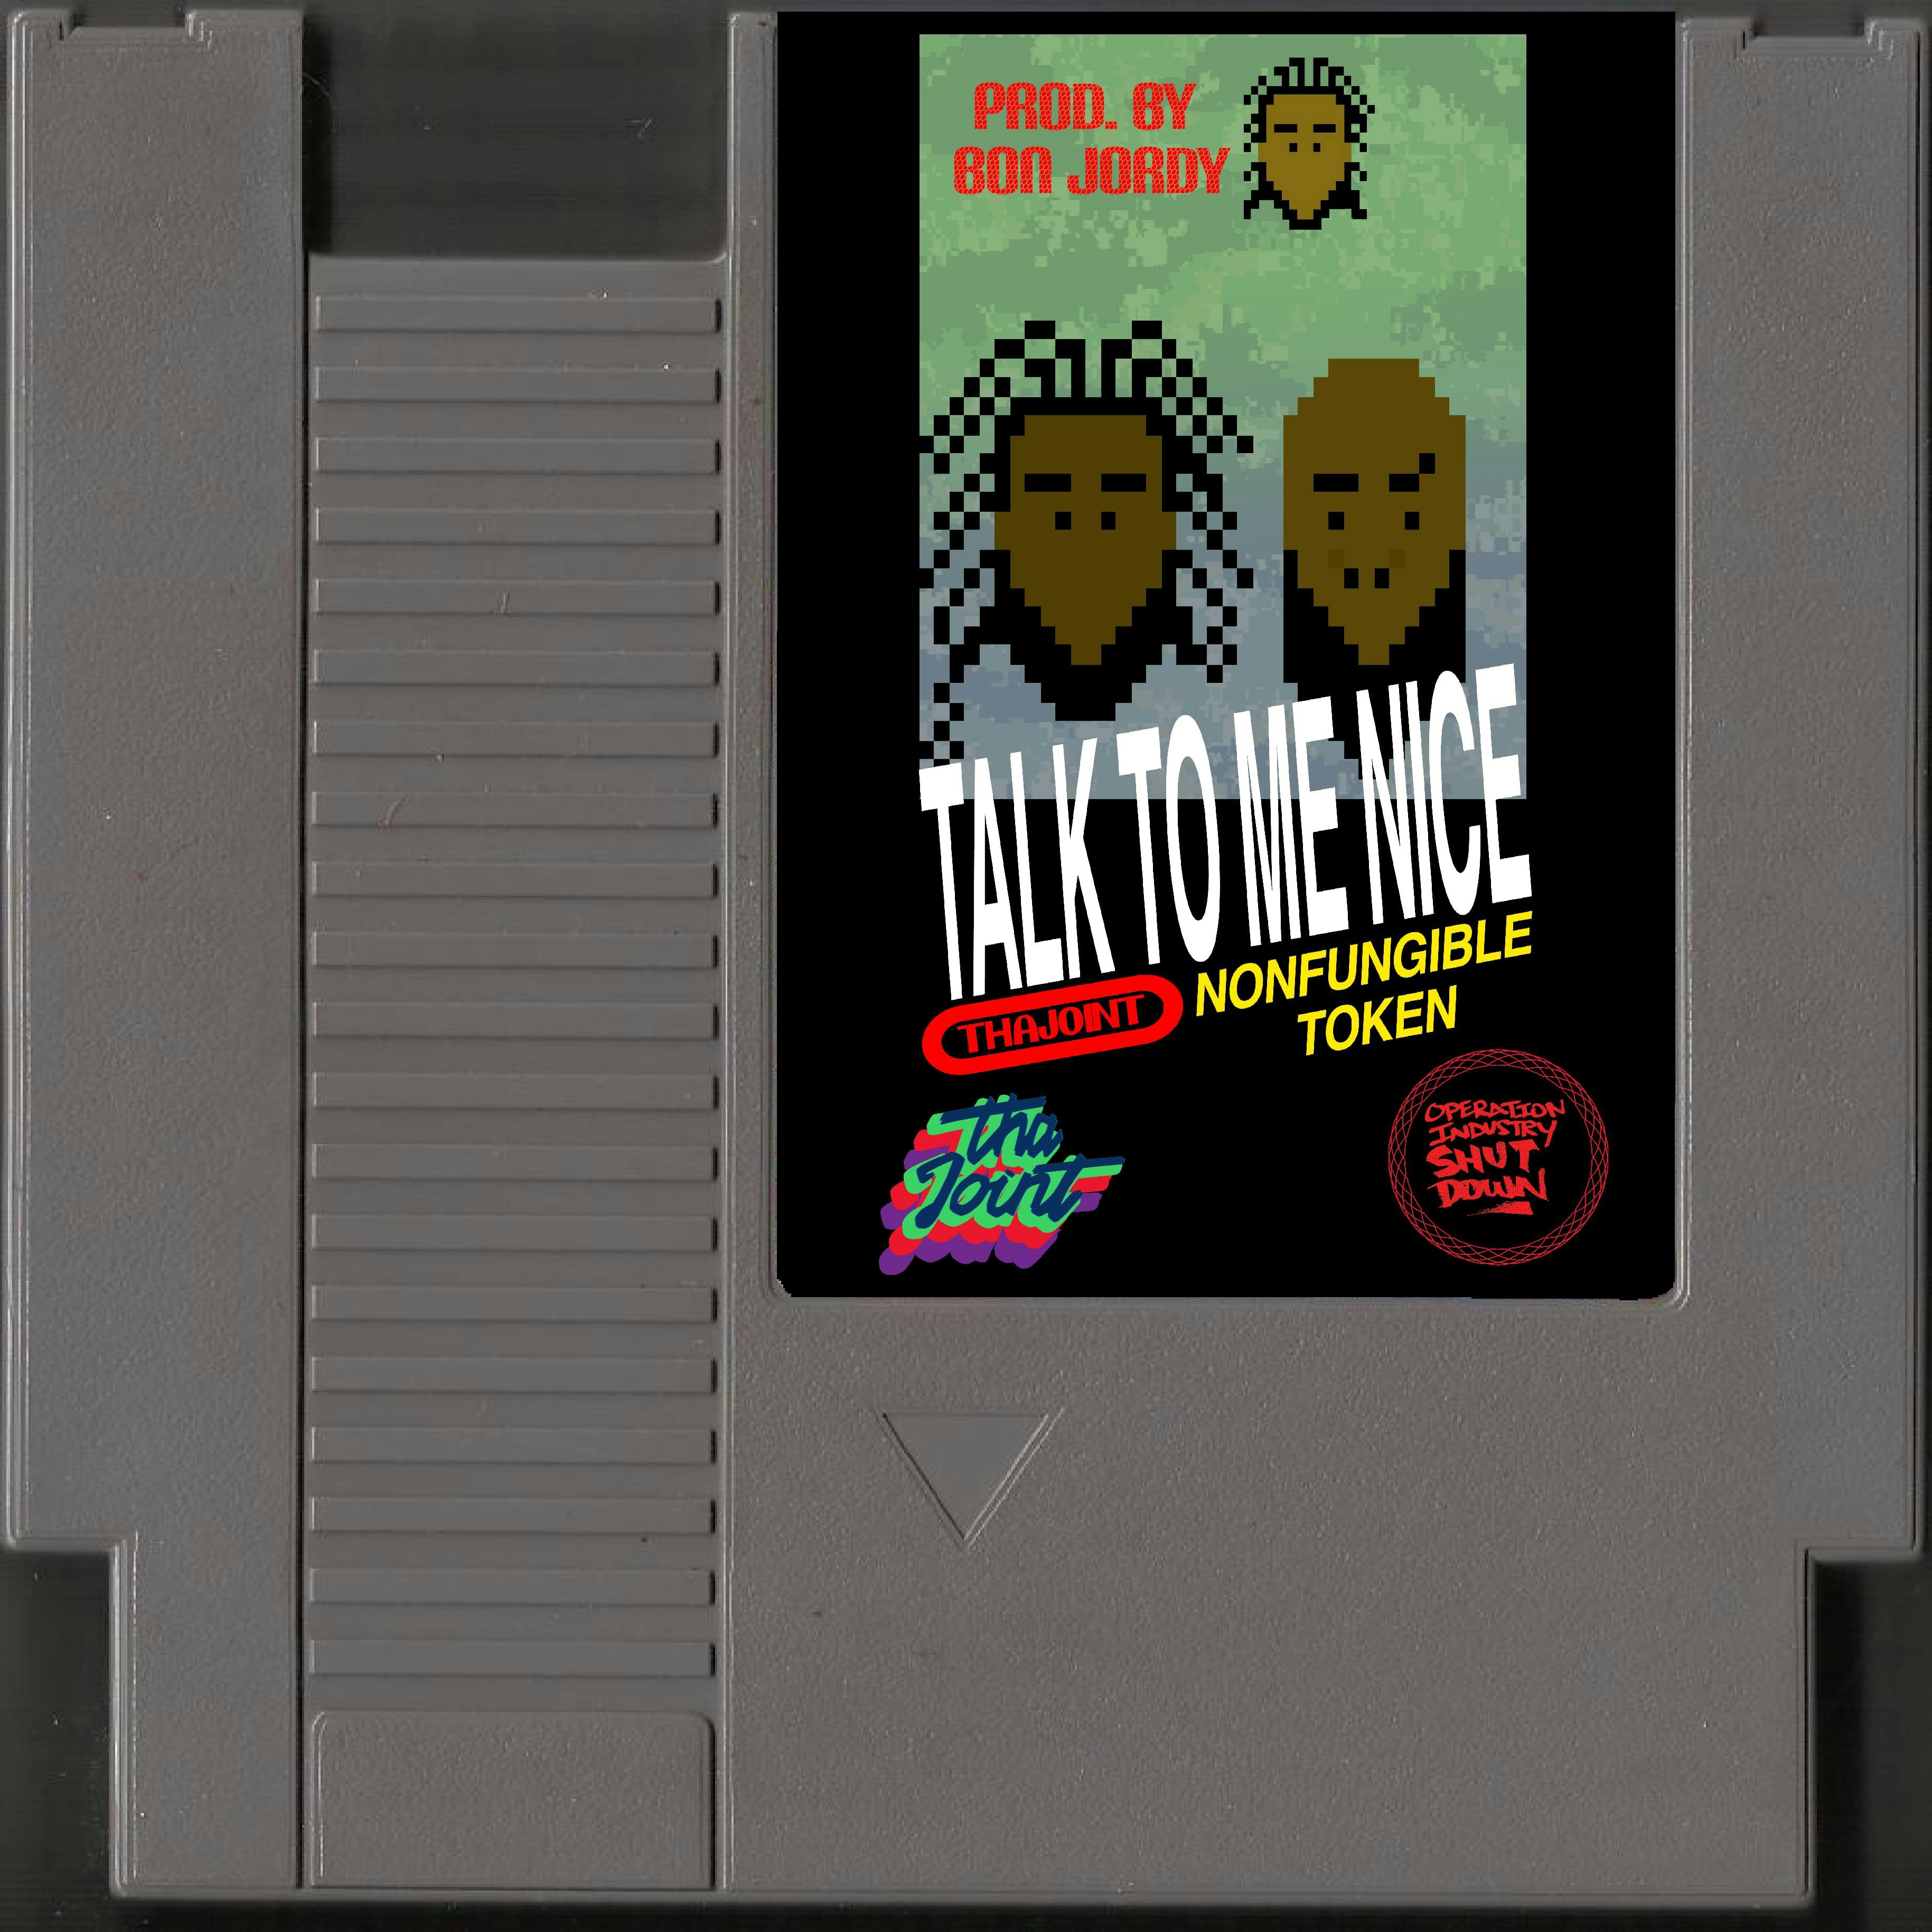 Cover art for tha Joint's song: Talk To Me Nice